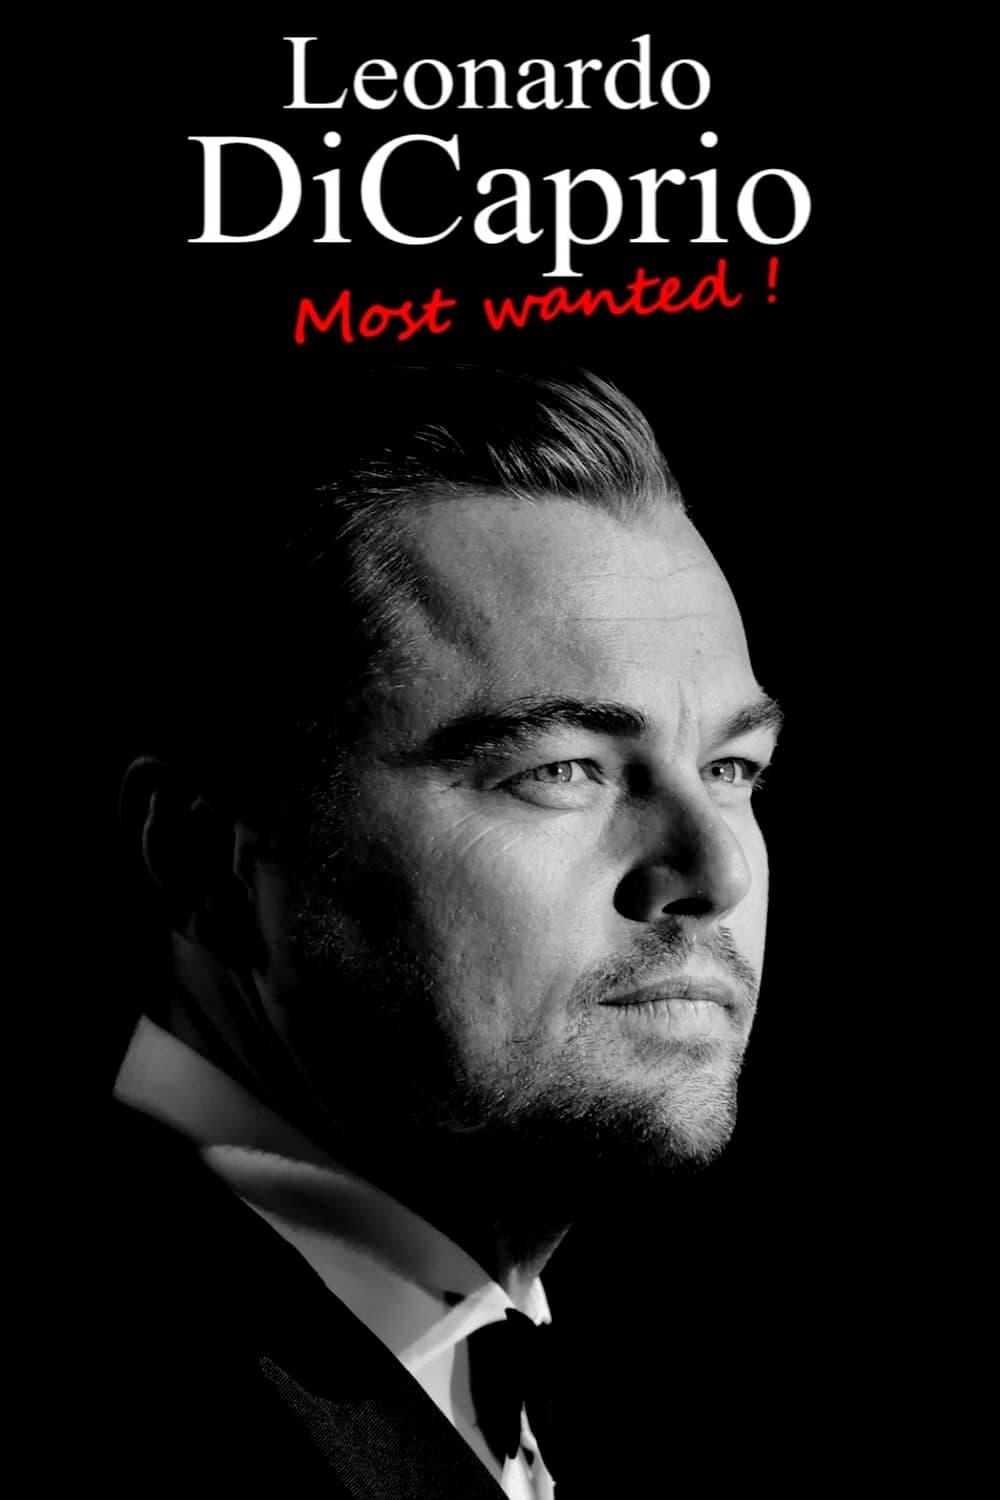 Leonardo DiCaprio: Most Wanted! poster